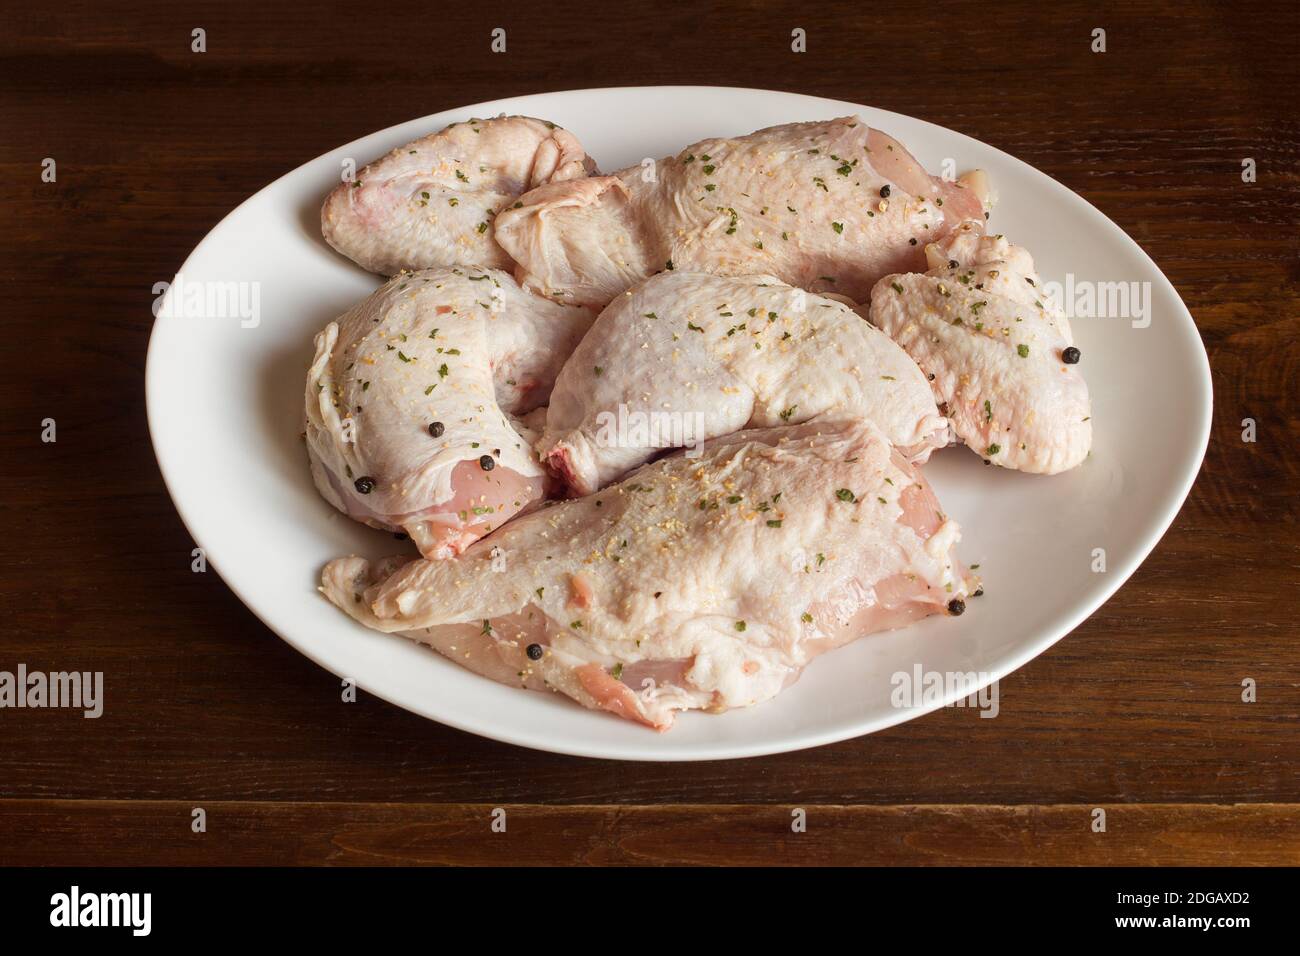 A platter with a boneless raw whole chicken seasoned with salt, black pepper, and spices. Food and meat. Organic texture background. Stock Photo